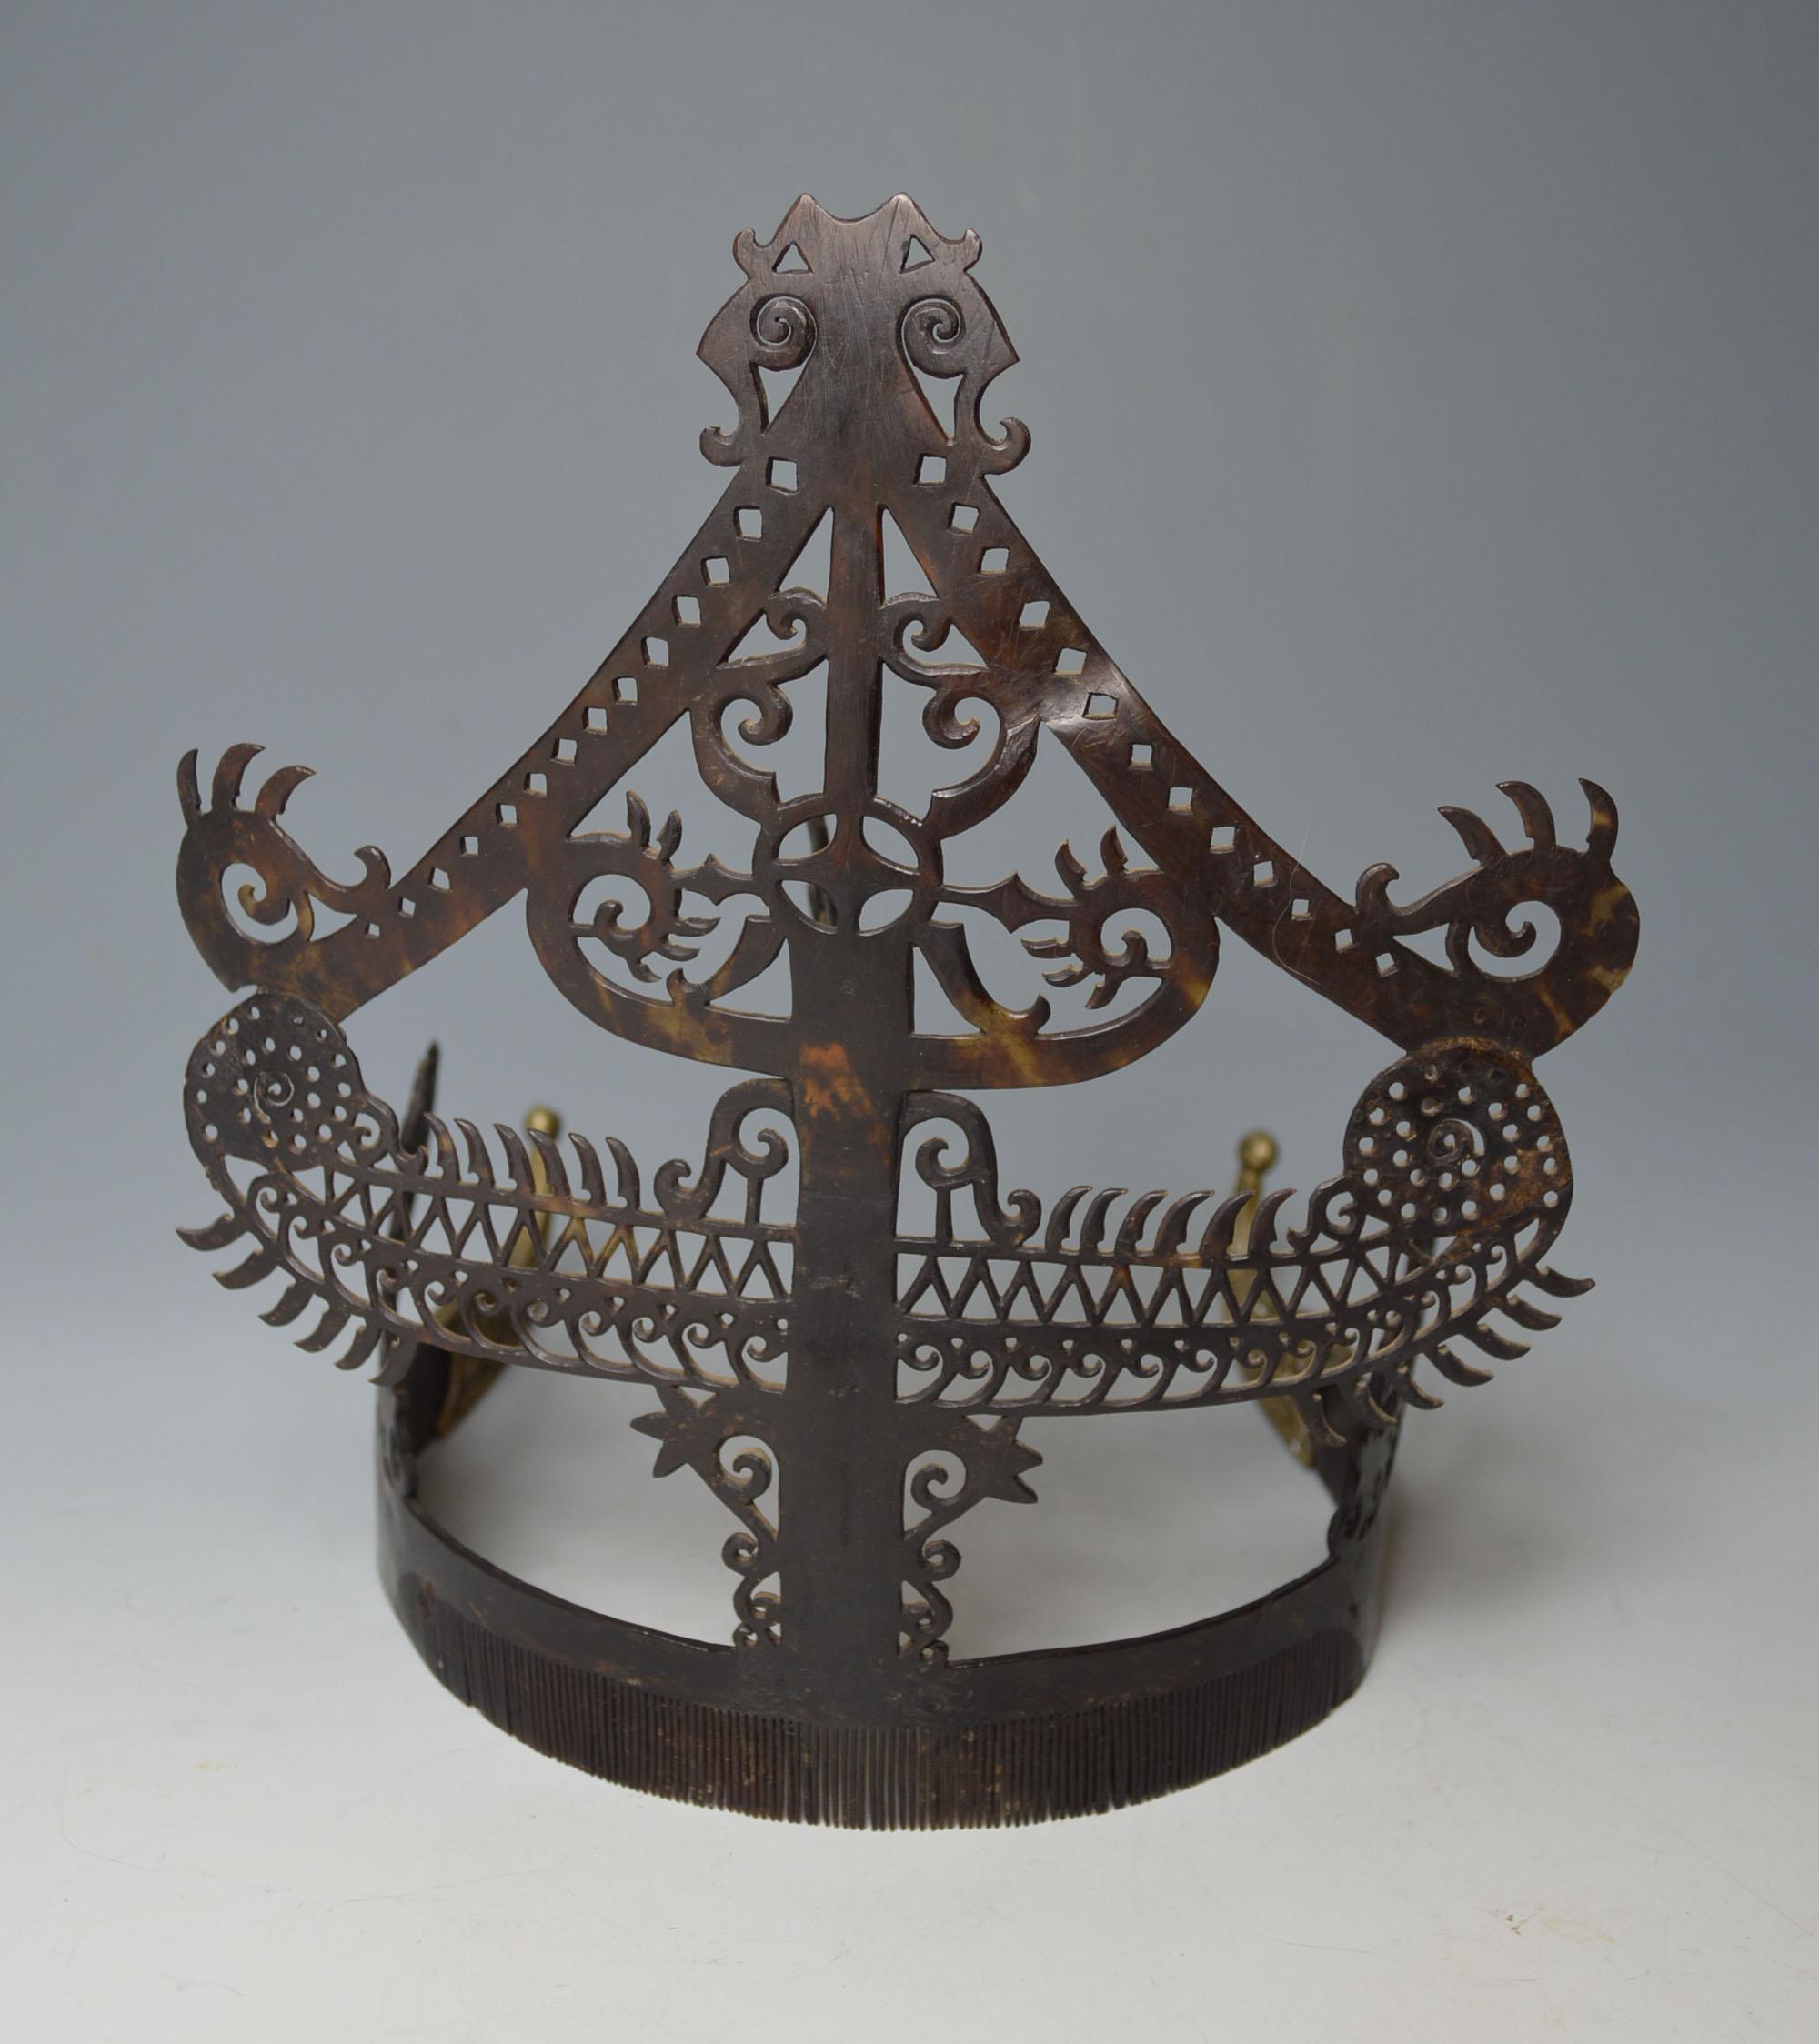 Large antique Indonesian Sumba Tribal headdress wedding comb Oriental Asian art

A stunning rare museum quality example of an old wedding comb headdress from the Sumba Island, Indonesia
Hand carved from turtle shell in half-spherical vaulted form